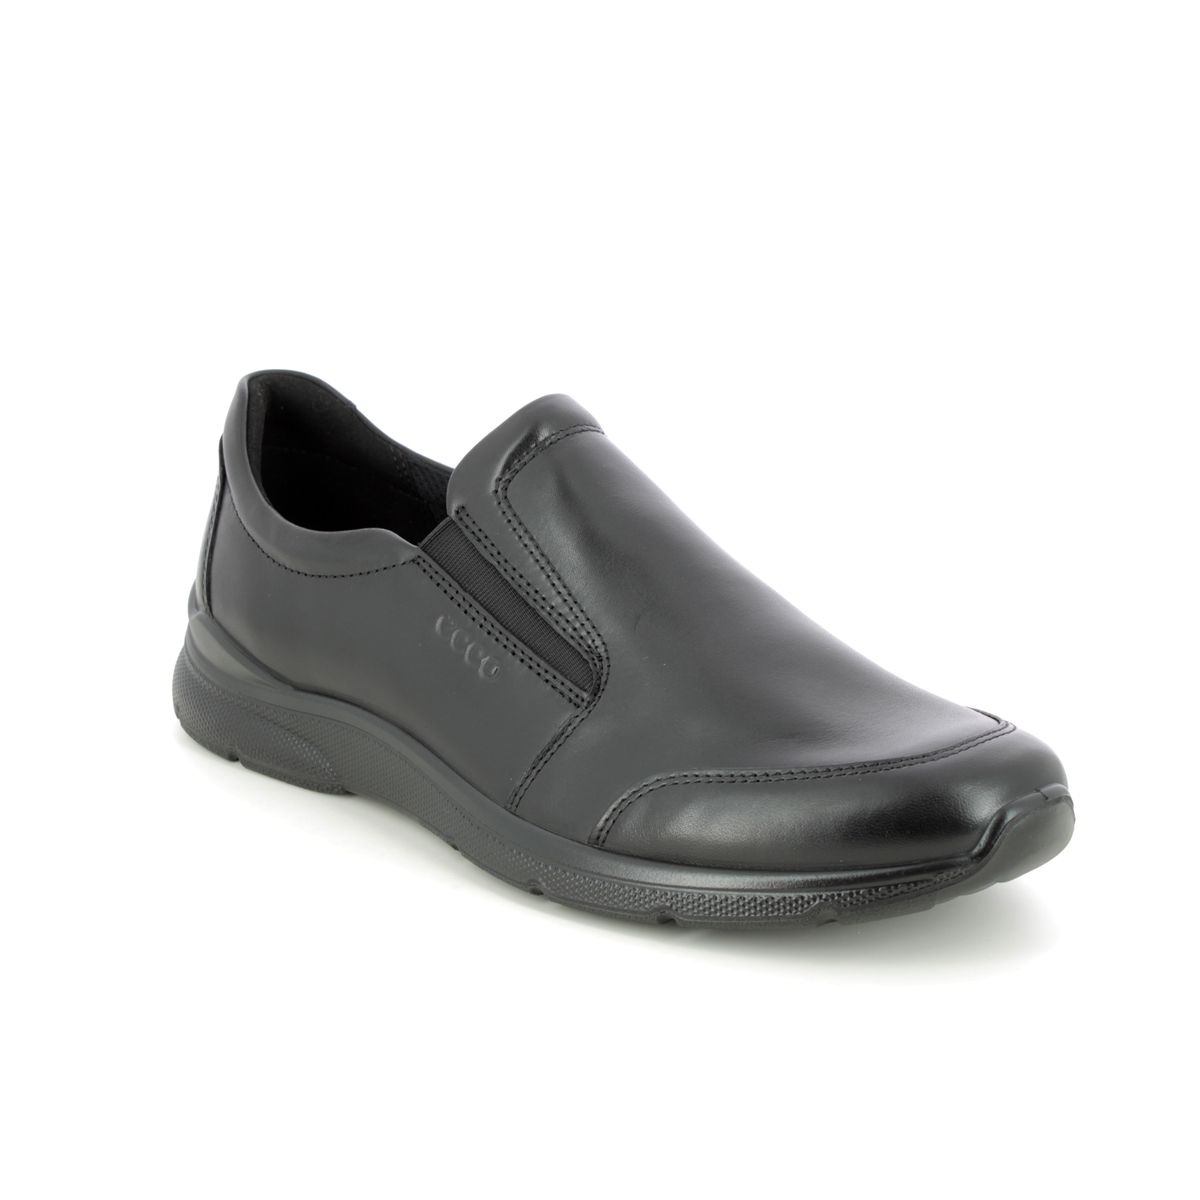 Ecco Irving Slip-On Black Leather Mens Slip-On Shoes 511684-11001 In Size 45 In Plain Black Leather